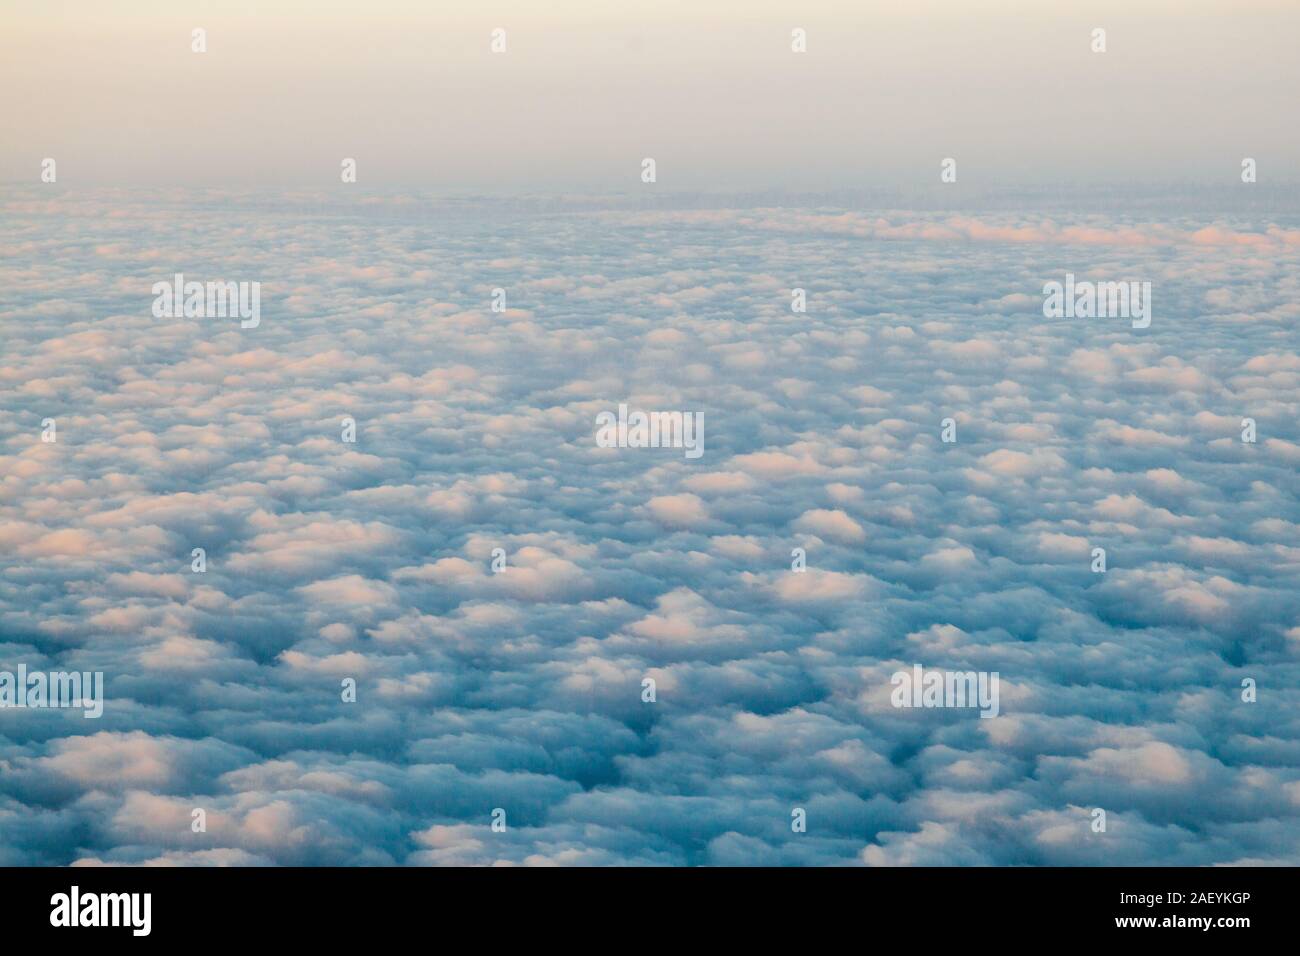 flying above the clouds at sunset landscape from an airplane Stock Photo